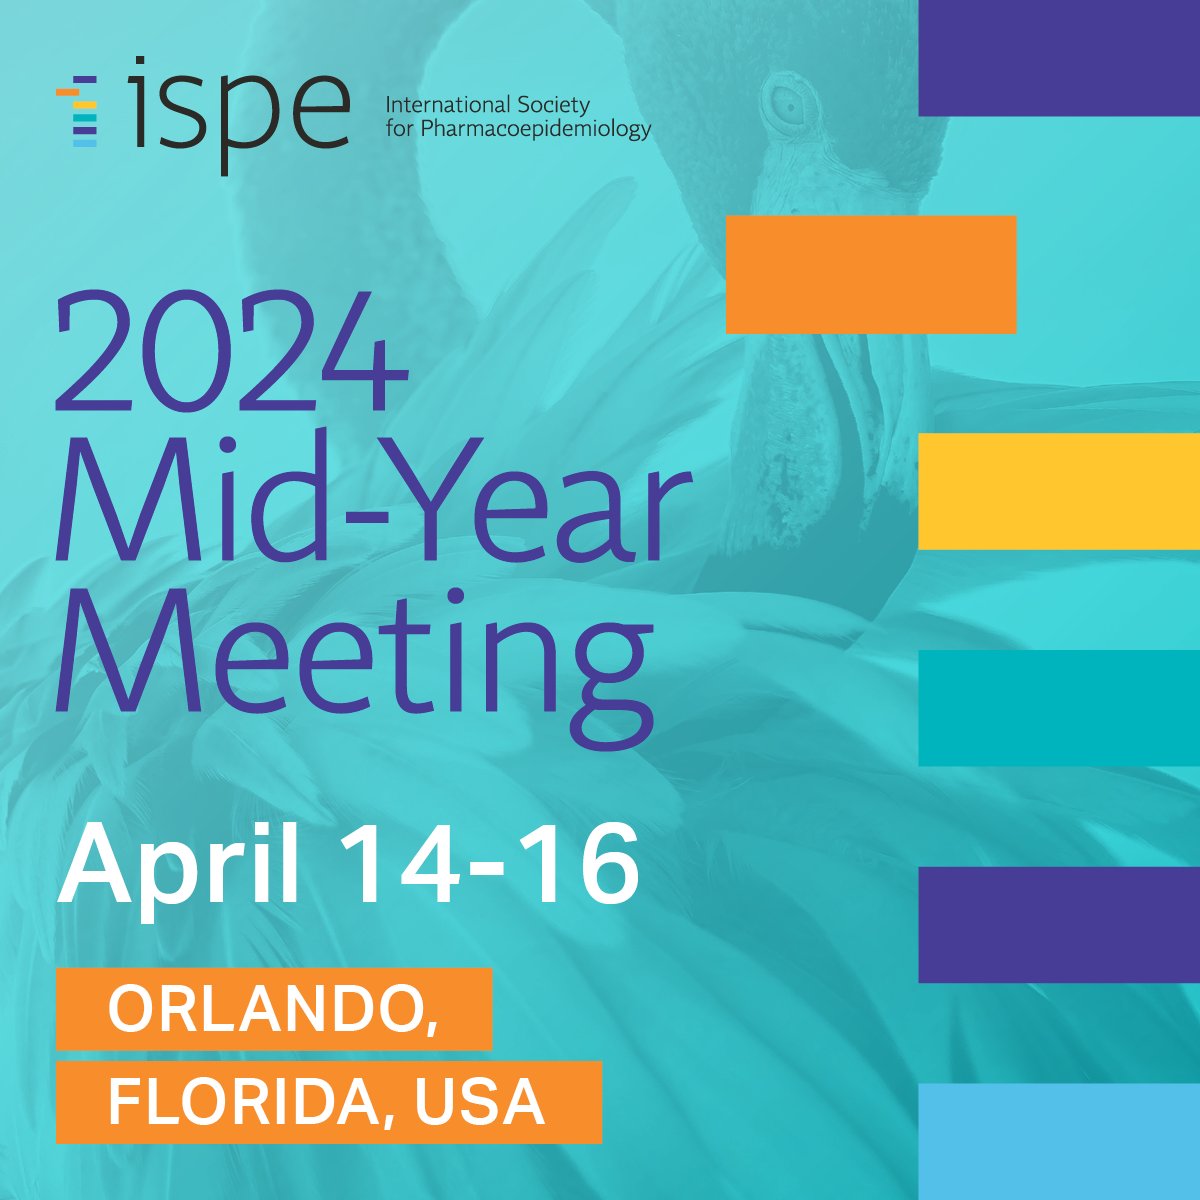 #ISPEMY2024 in Orlando, Florida, April 14-16, is just two weeks away! We can't wait to join together to shape the impact #Pharmacoepidemiology has on global health & pave the way for a healthier future. Register now: bit.ly/495eUMF #PharmacoEpi #EpiTwitter #RWE